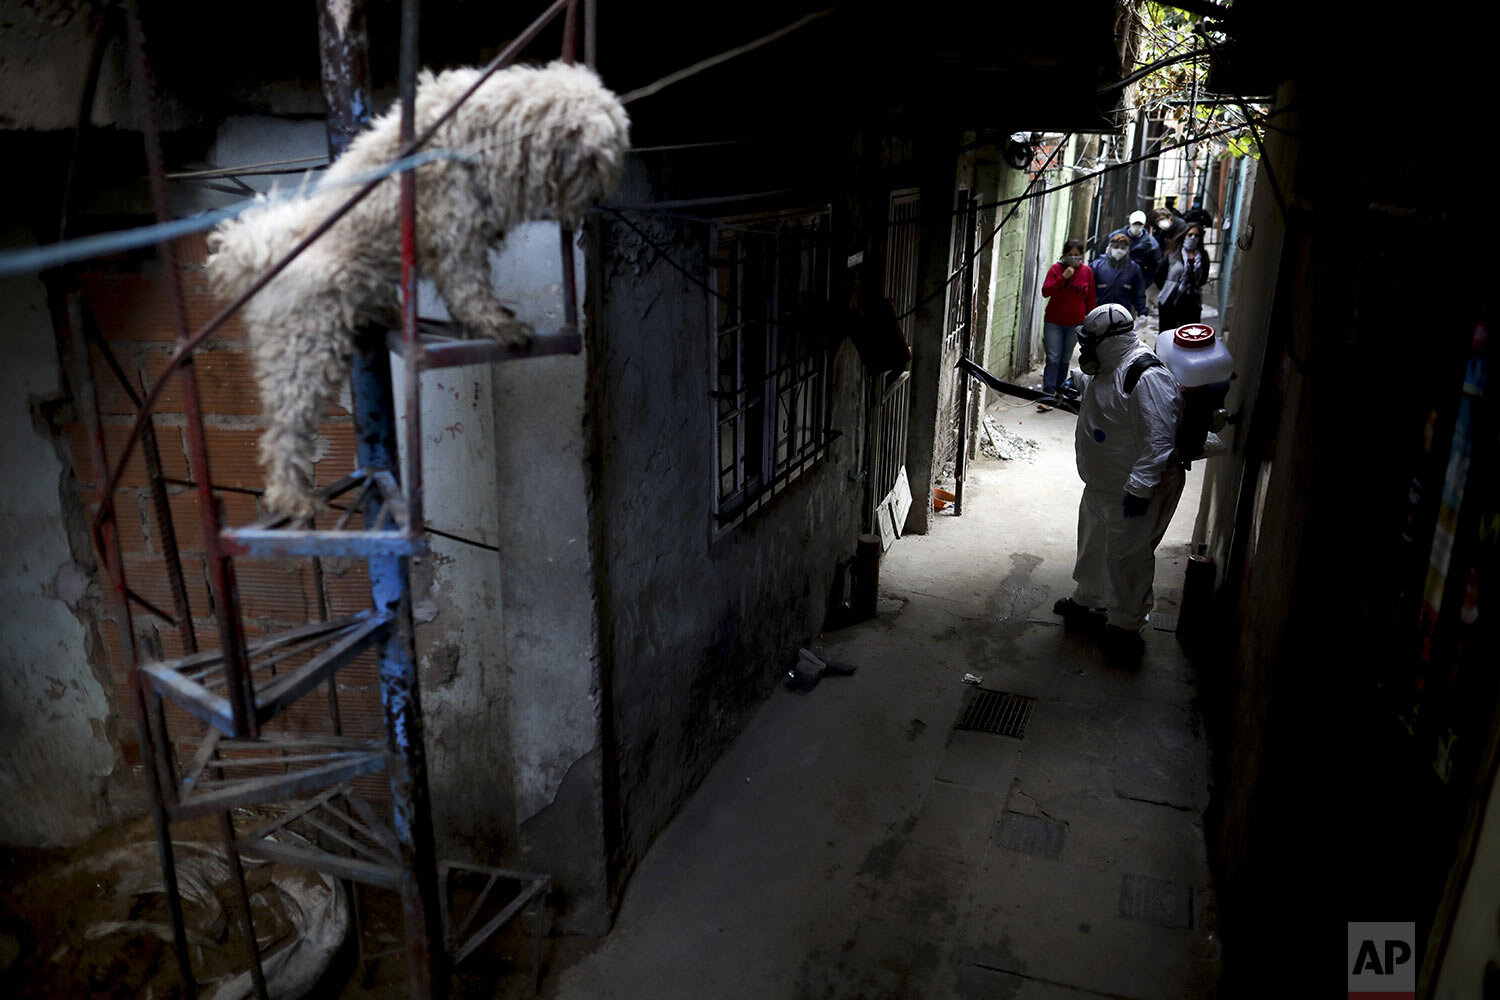  A dog stands on a staircase where a worker disinfects the streets of "Villa 31" in Buenos Aires, Argentina, Tuesday, May 5, 2020. (AP Photo/Natacha Pisarenko) 